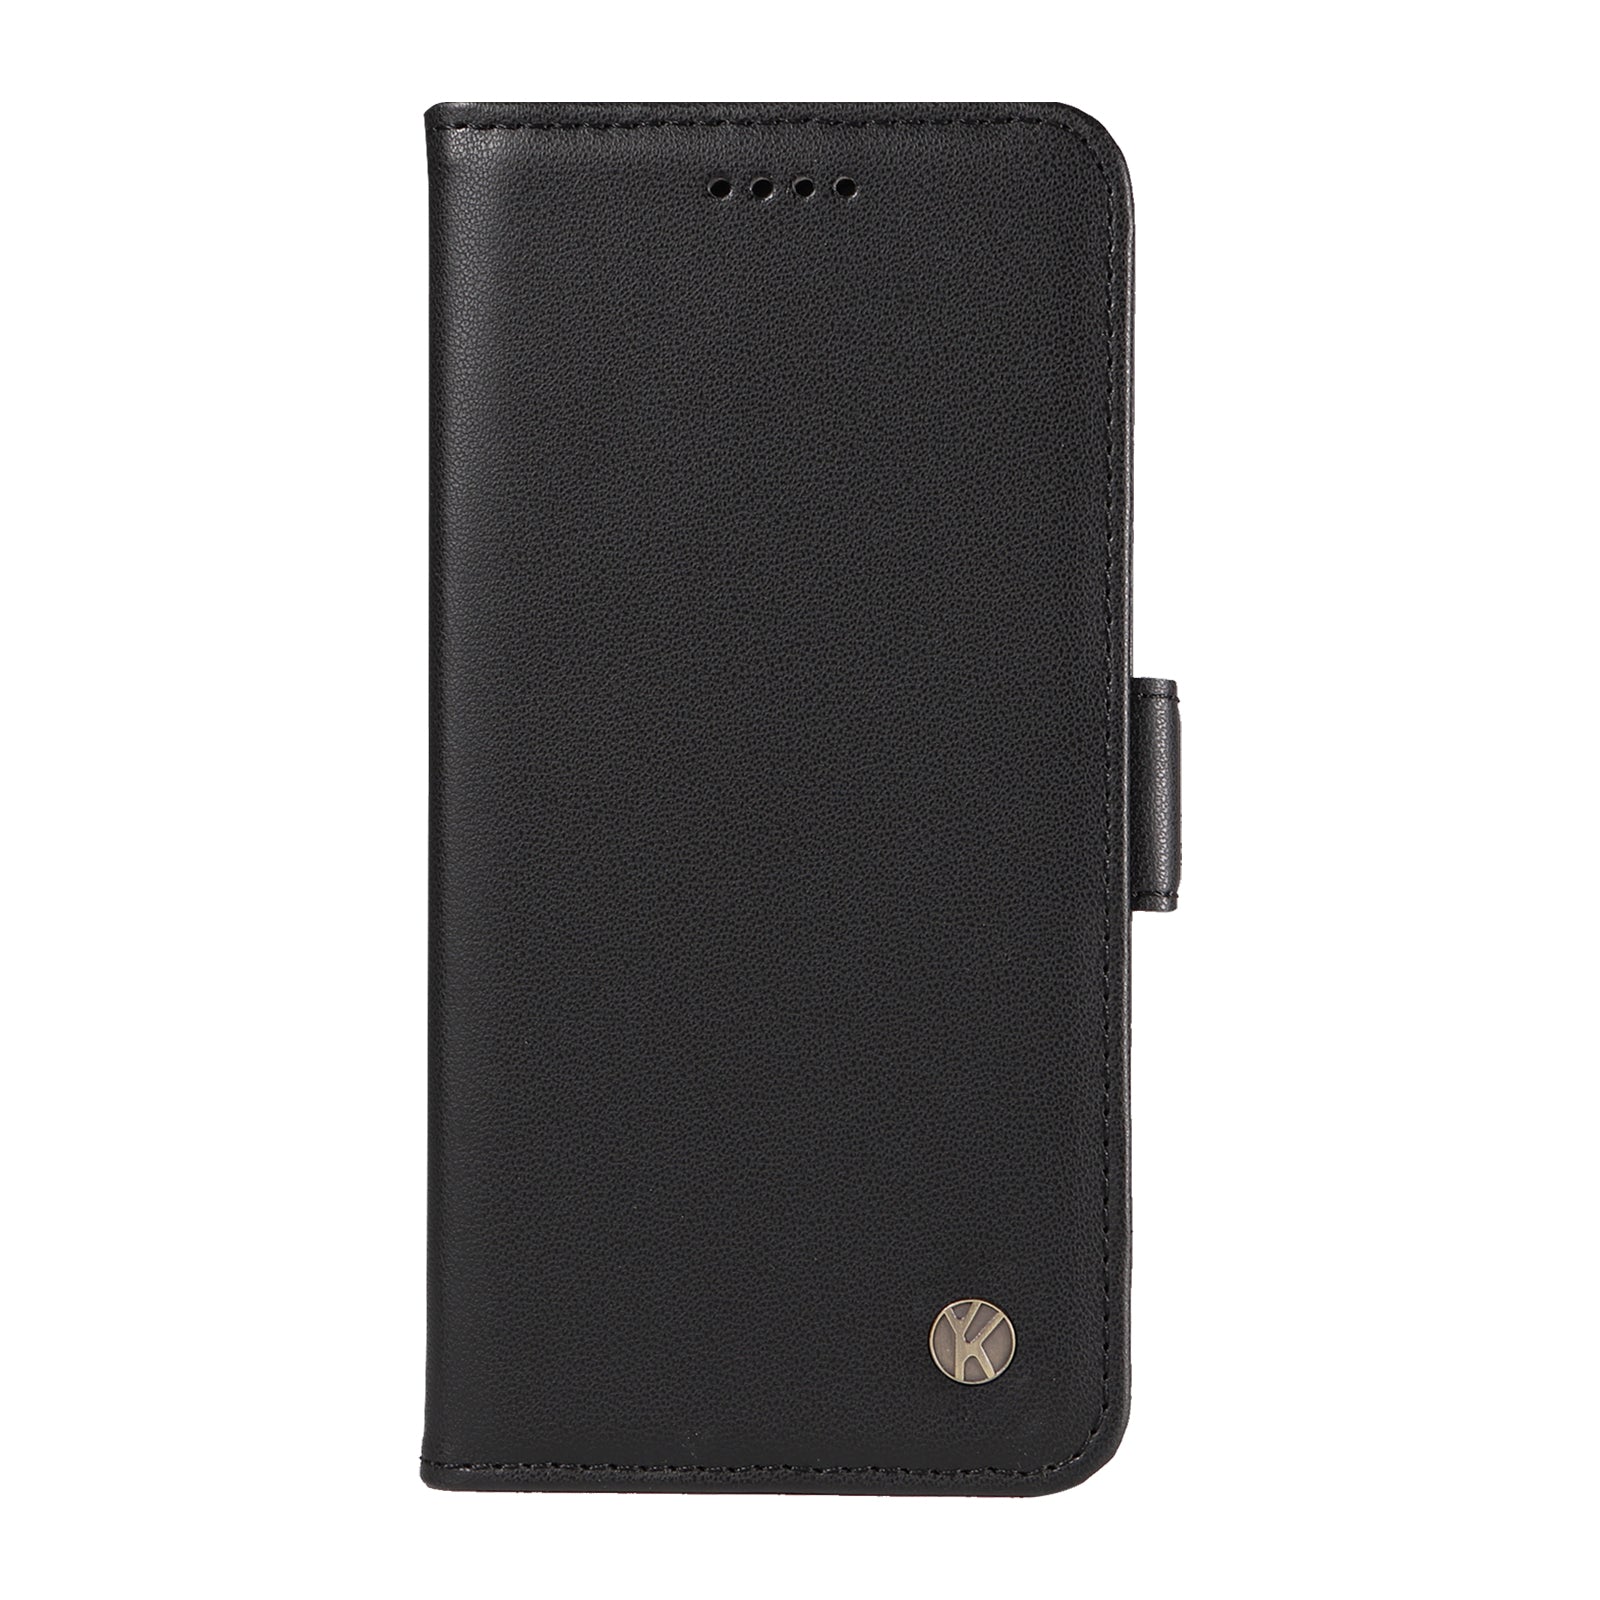 YIKATU YK-003 For Realme 12+ 5G Case Wallet PU Leather+TPU Cover Phone Accessories Distributors - Black